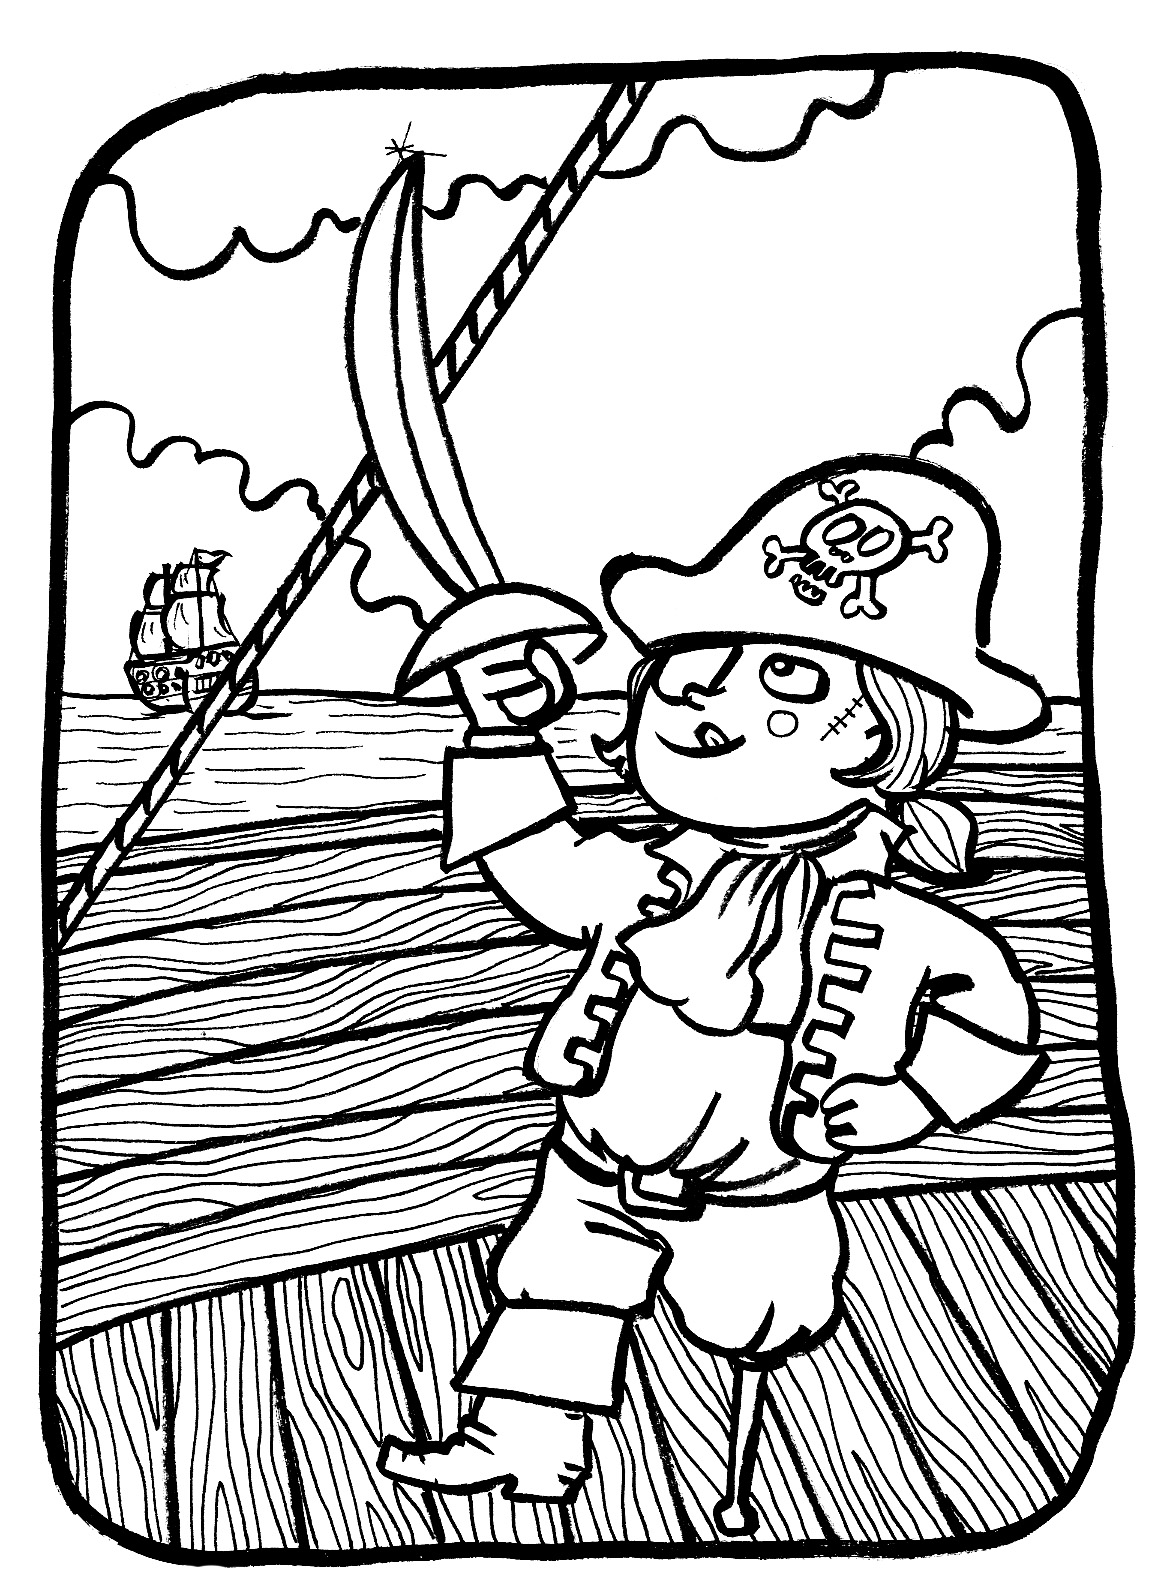 Printable Coloring Page for Kids of a pirate with a wooden leg